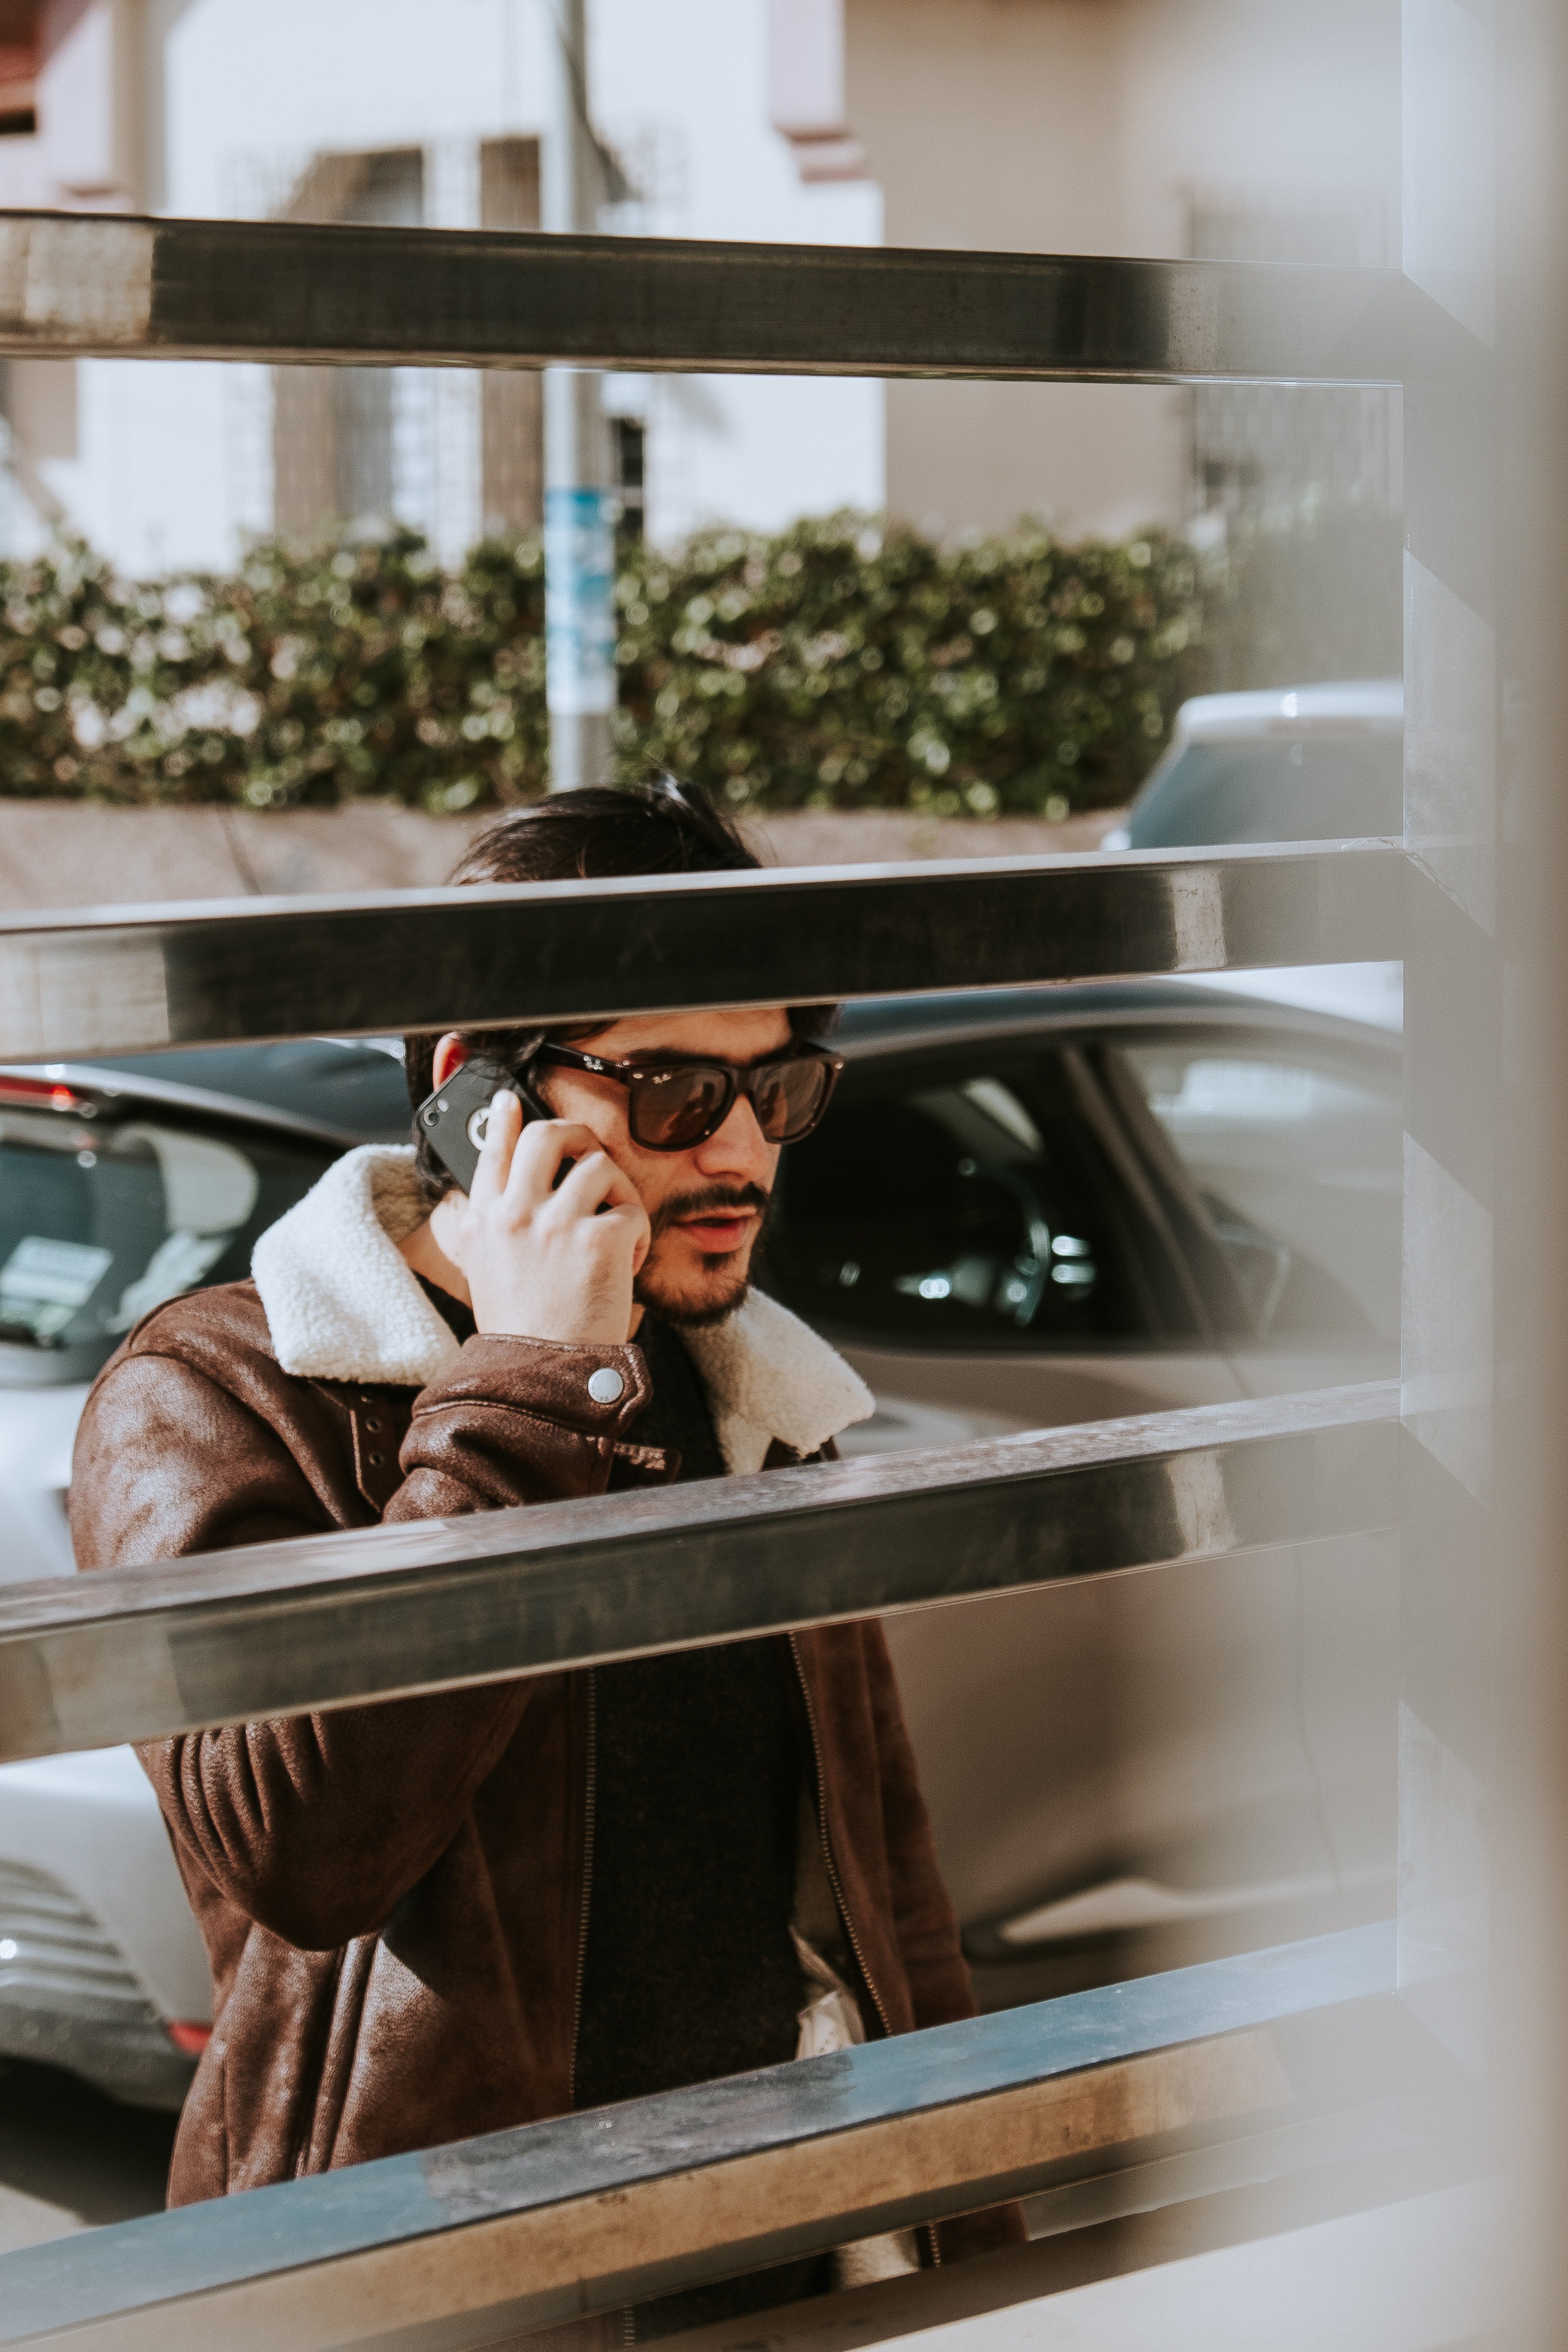 Mark decided to confront his dad about the results by giving him a call. | Source: Pexels